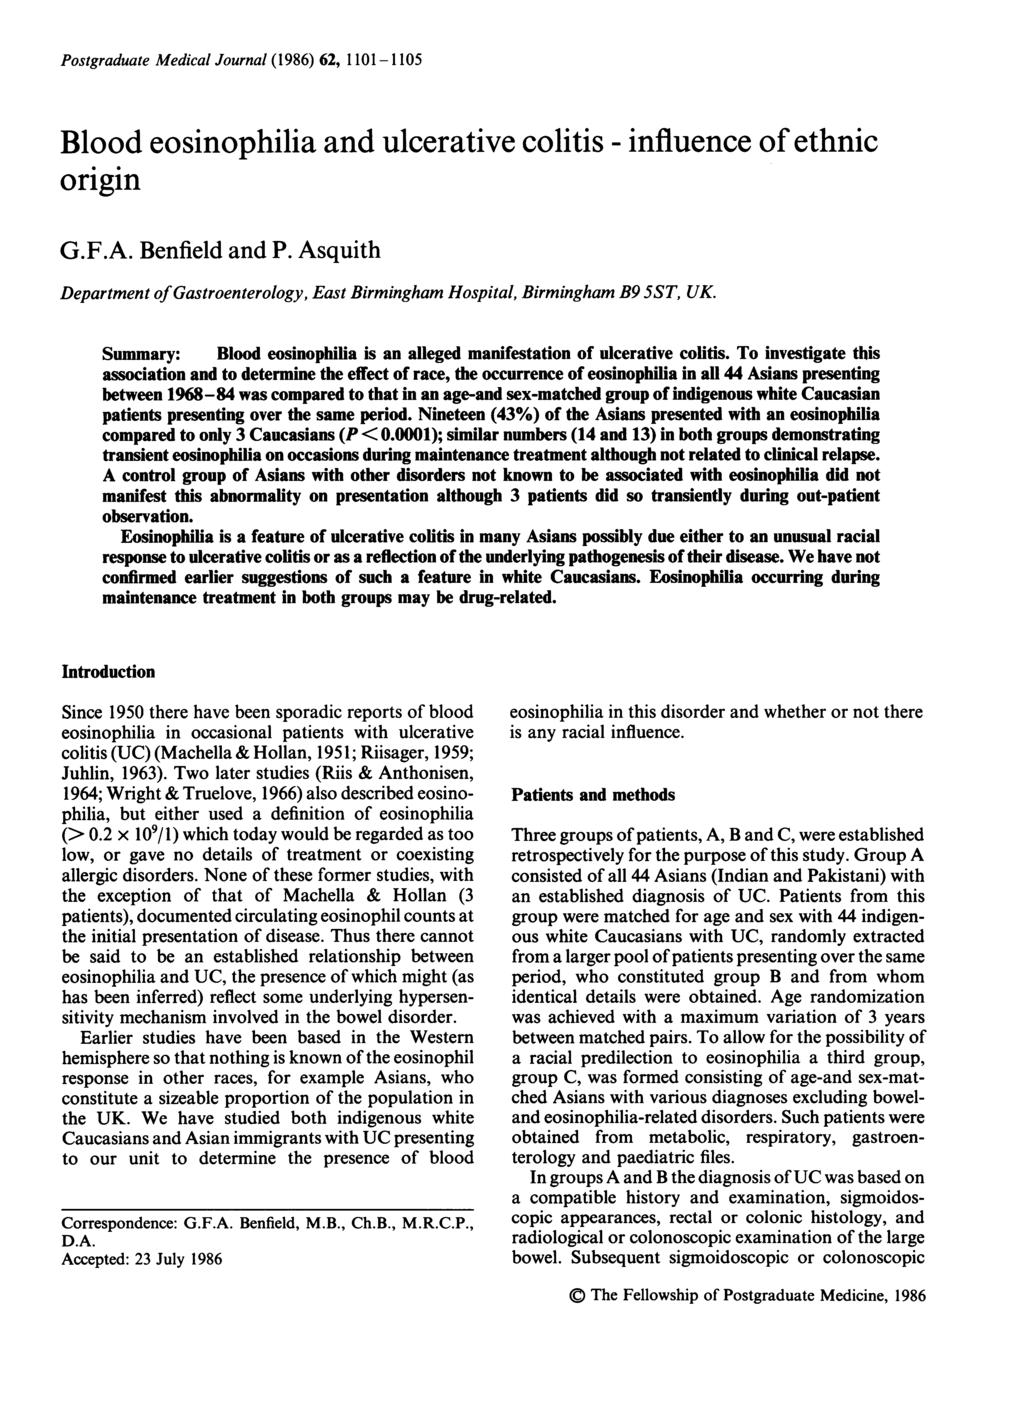 Postgraduate Medical Journal (1986) 62, 1101-1105 Blood eosinophilia and ulcerative colitis - influence of ethnic origin G.F.A. Benfield and P.